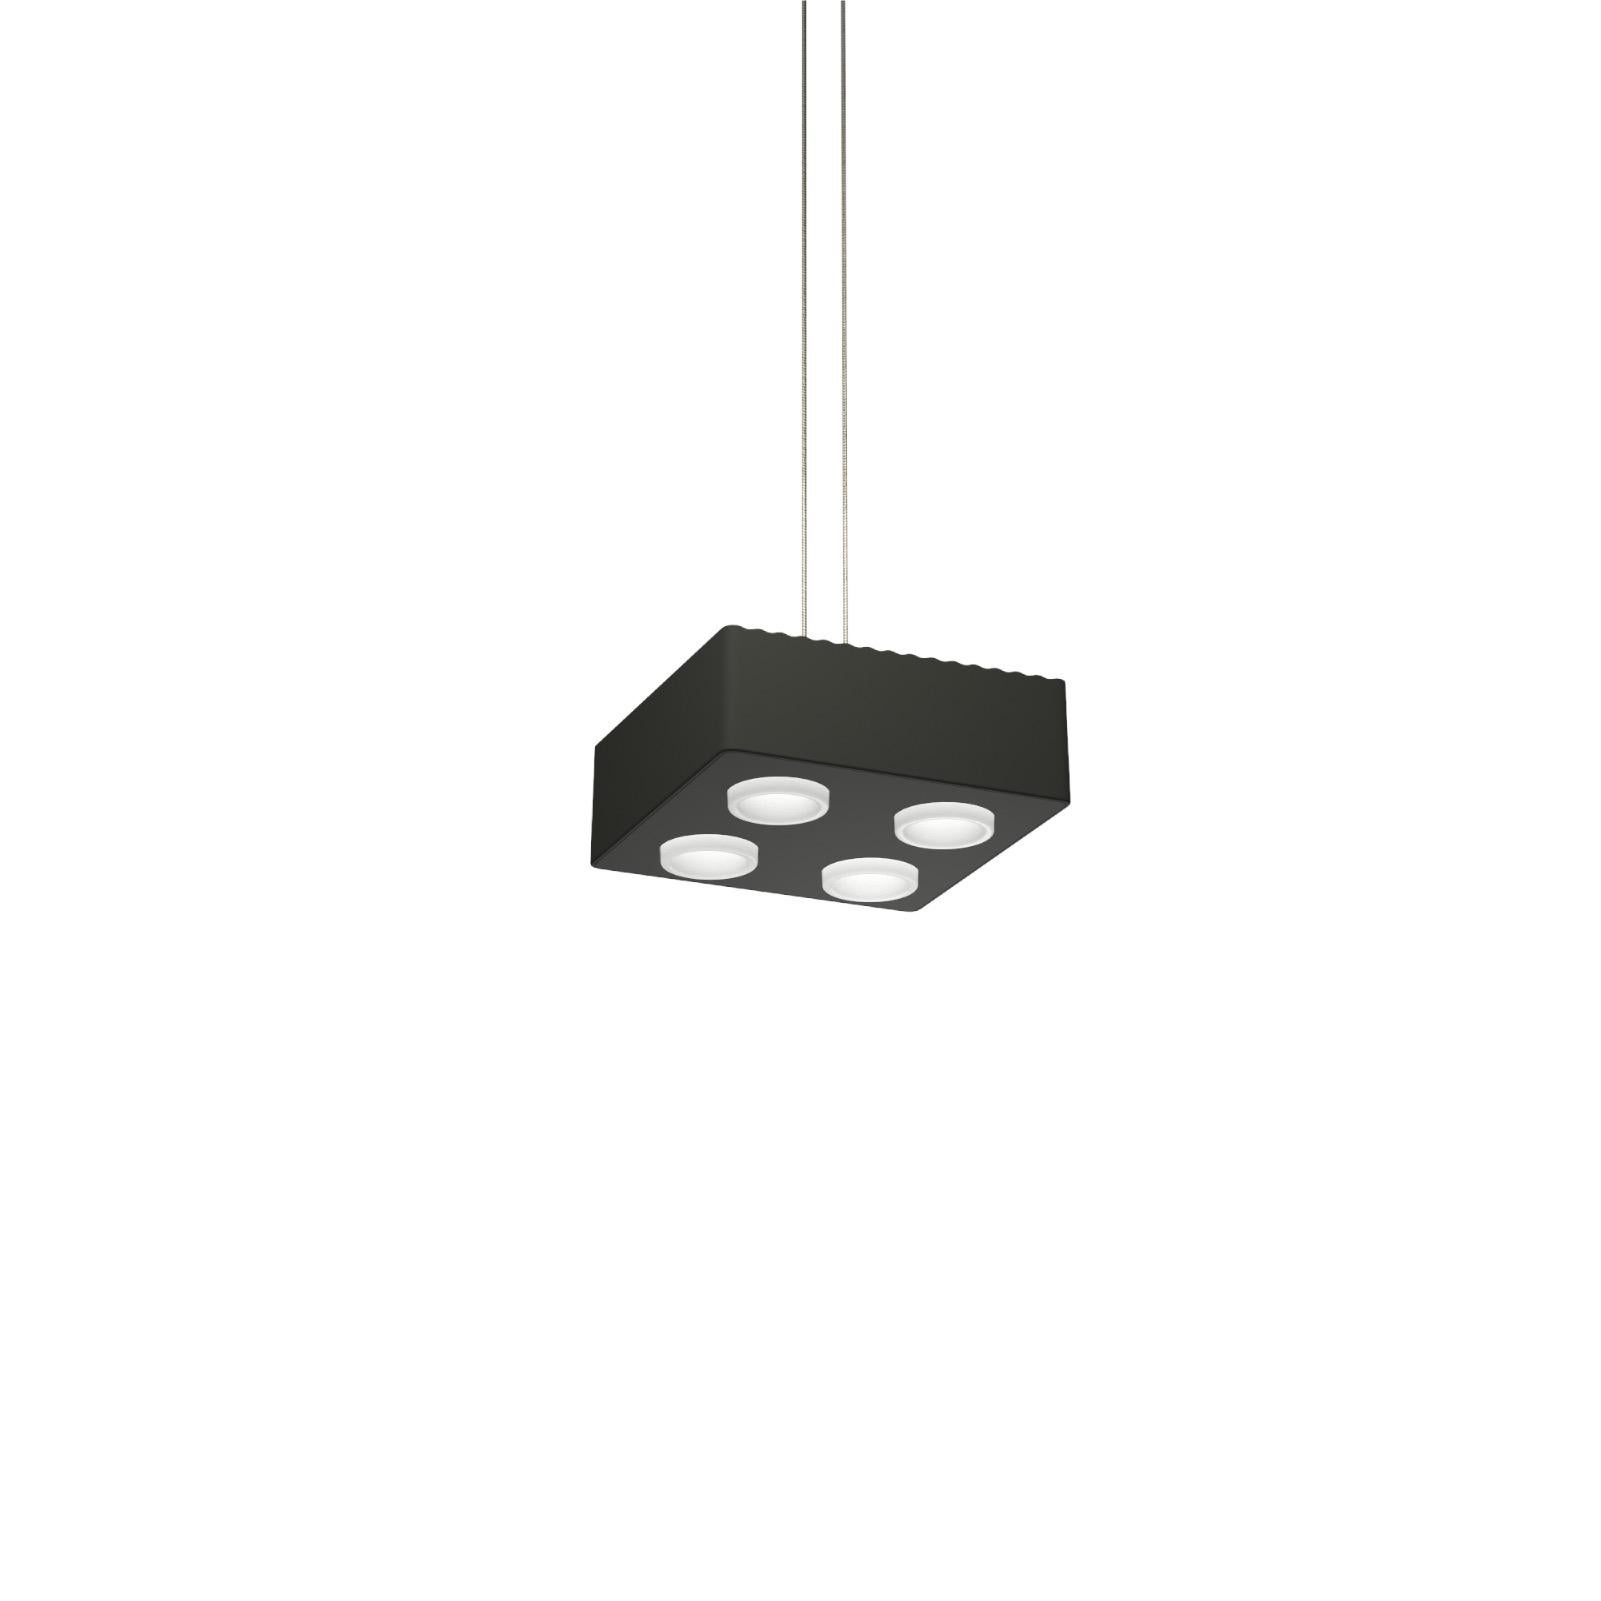 Domino Pendant lamp by Sylvain Willenz x AGO Lighting
Charcoal Single Pendant Lamp
Materials: Aluminum
Light Source: Integrated LED (COB), DC
Watt. 15 W
Color temp. 2700 / 3000K
Cable Length: 3M
Available colors:
Charcoal, burgundy,